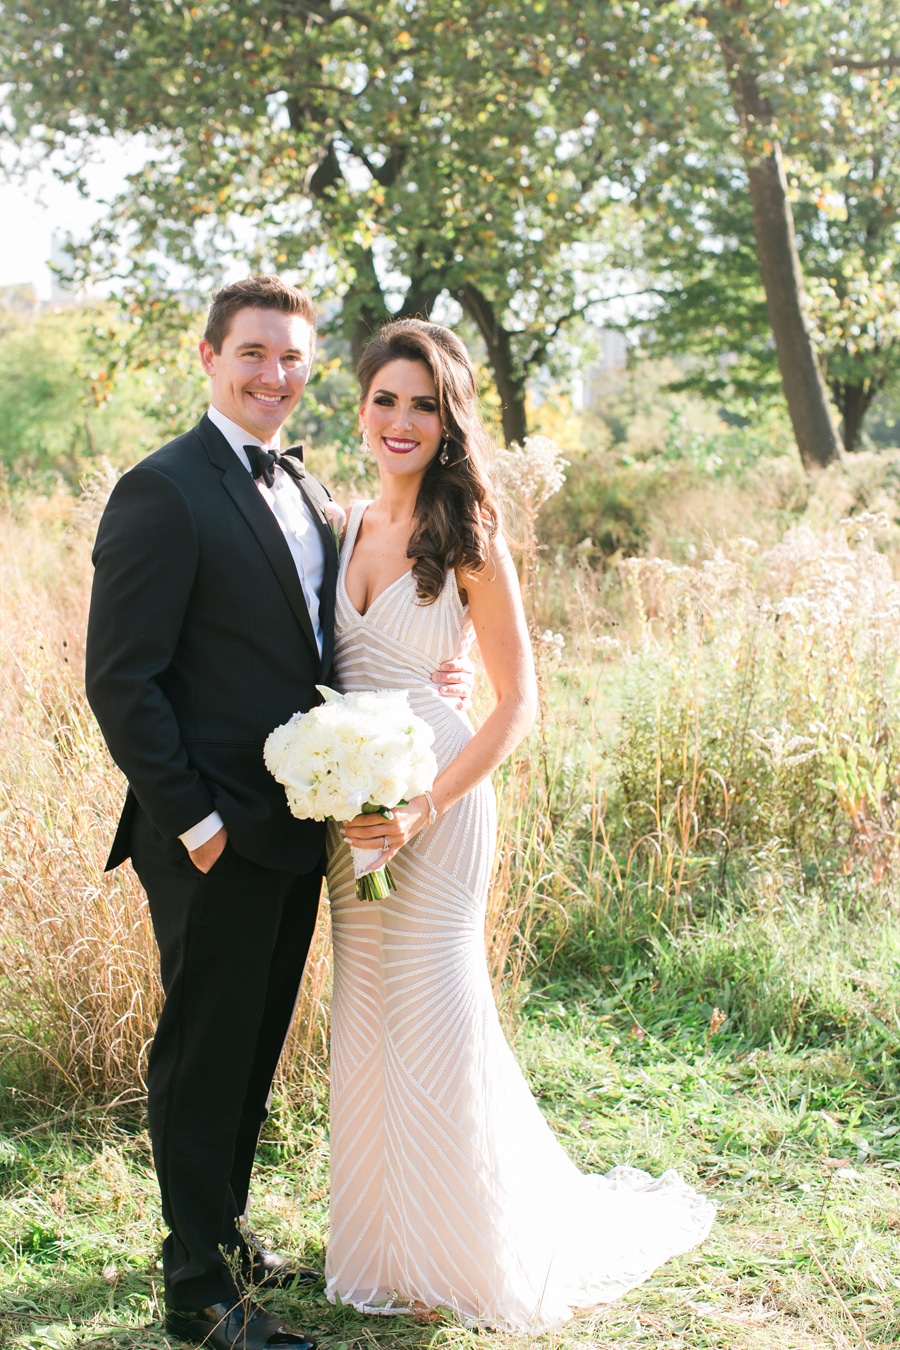 A fall wedding at Cafe Brauer in Chicago.